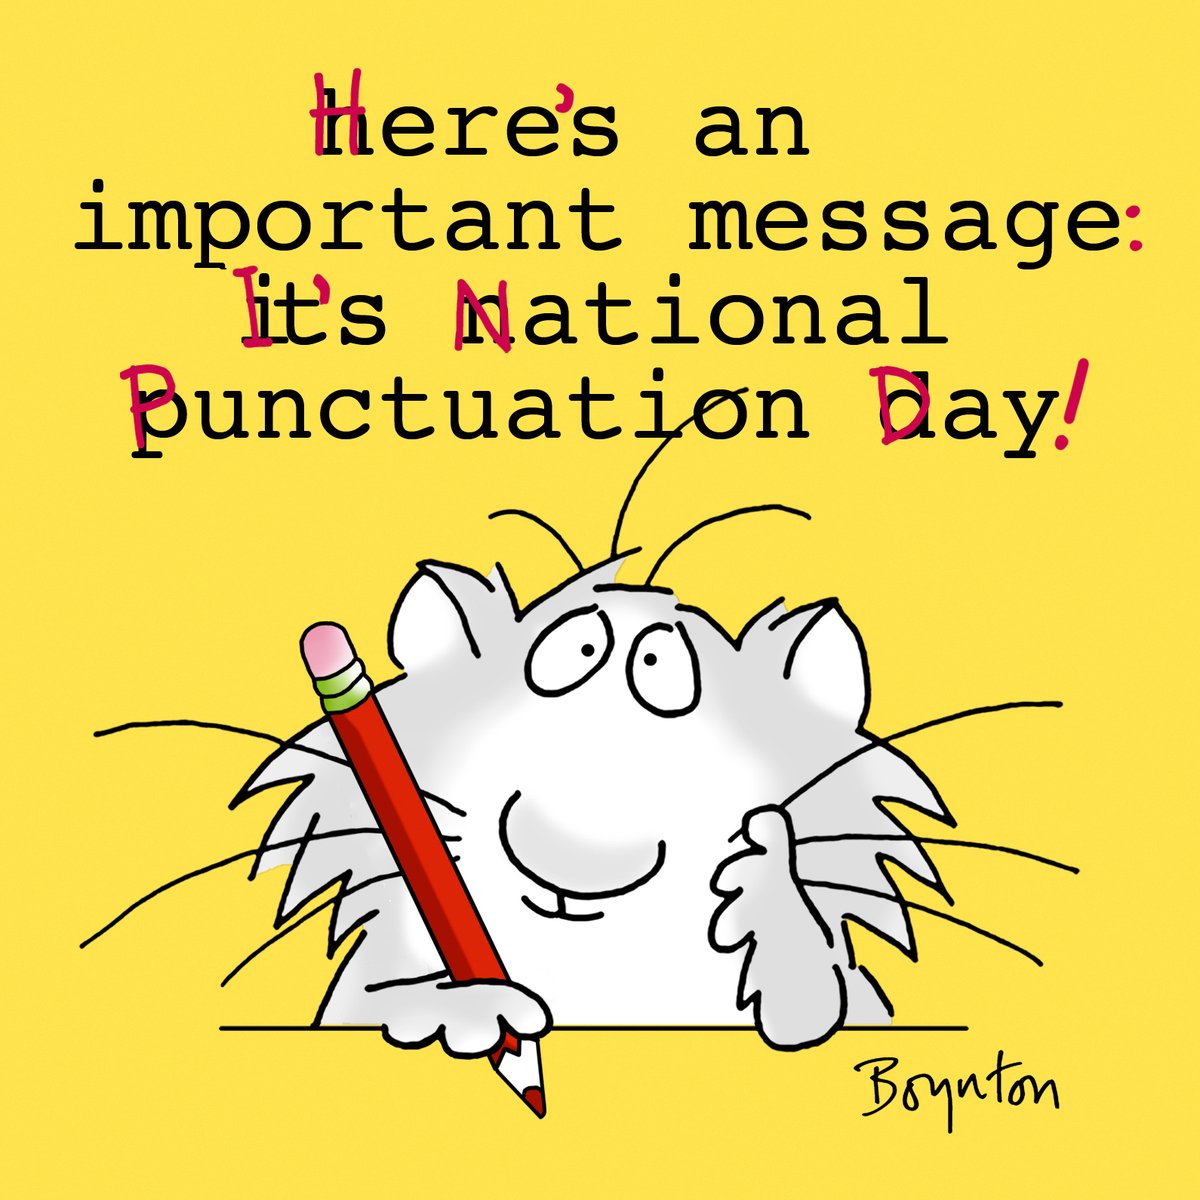 Punctuate responsibly. #PunctuationDay